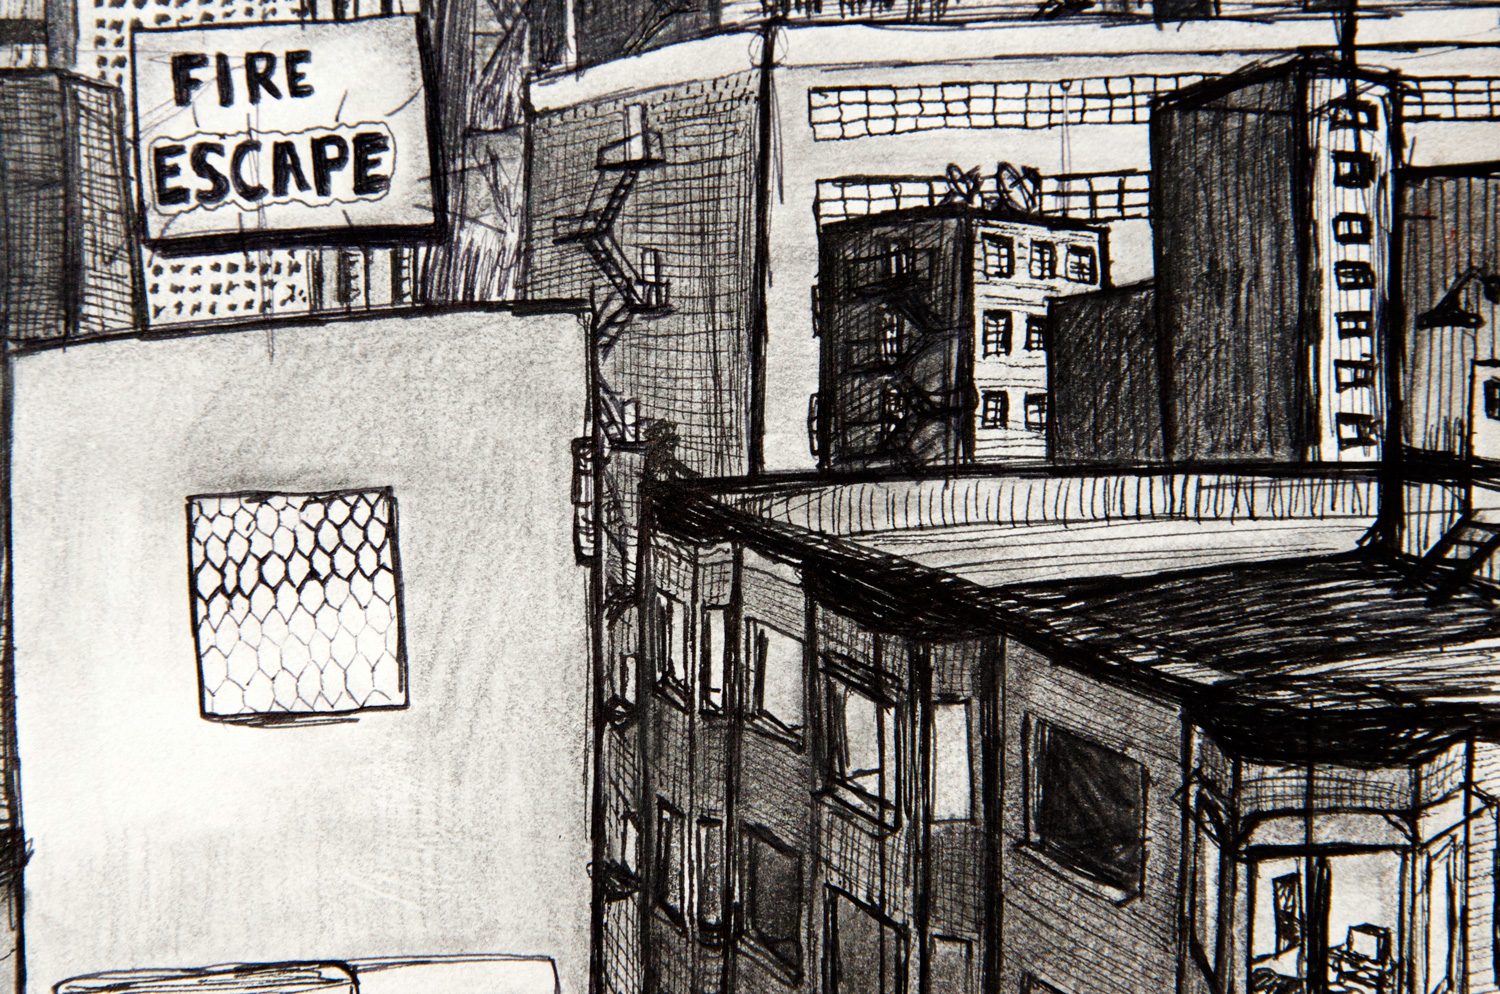 Fire Escape drawing (Chicago imaginary cityscape), by Billy Reiter